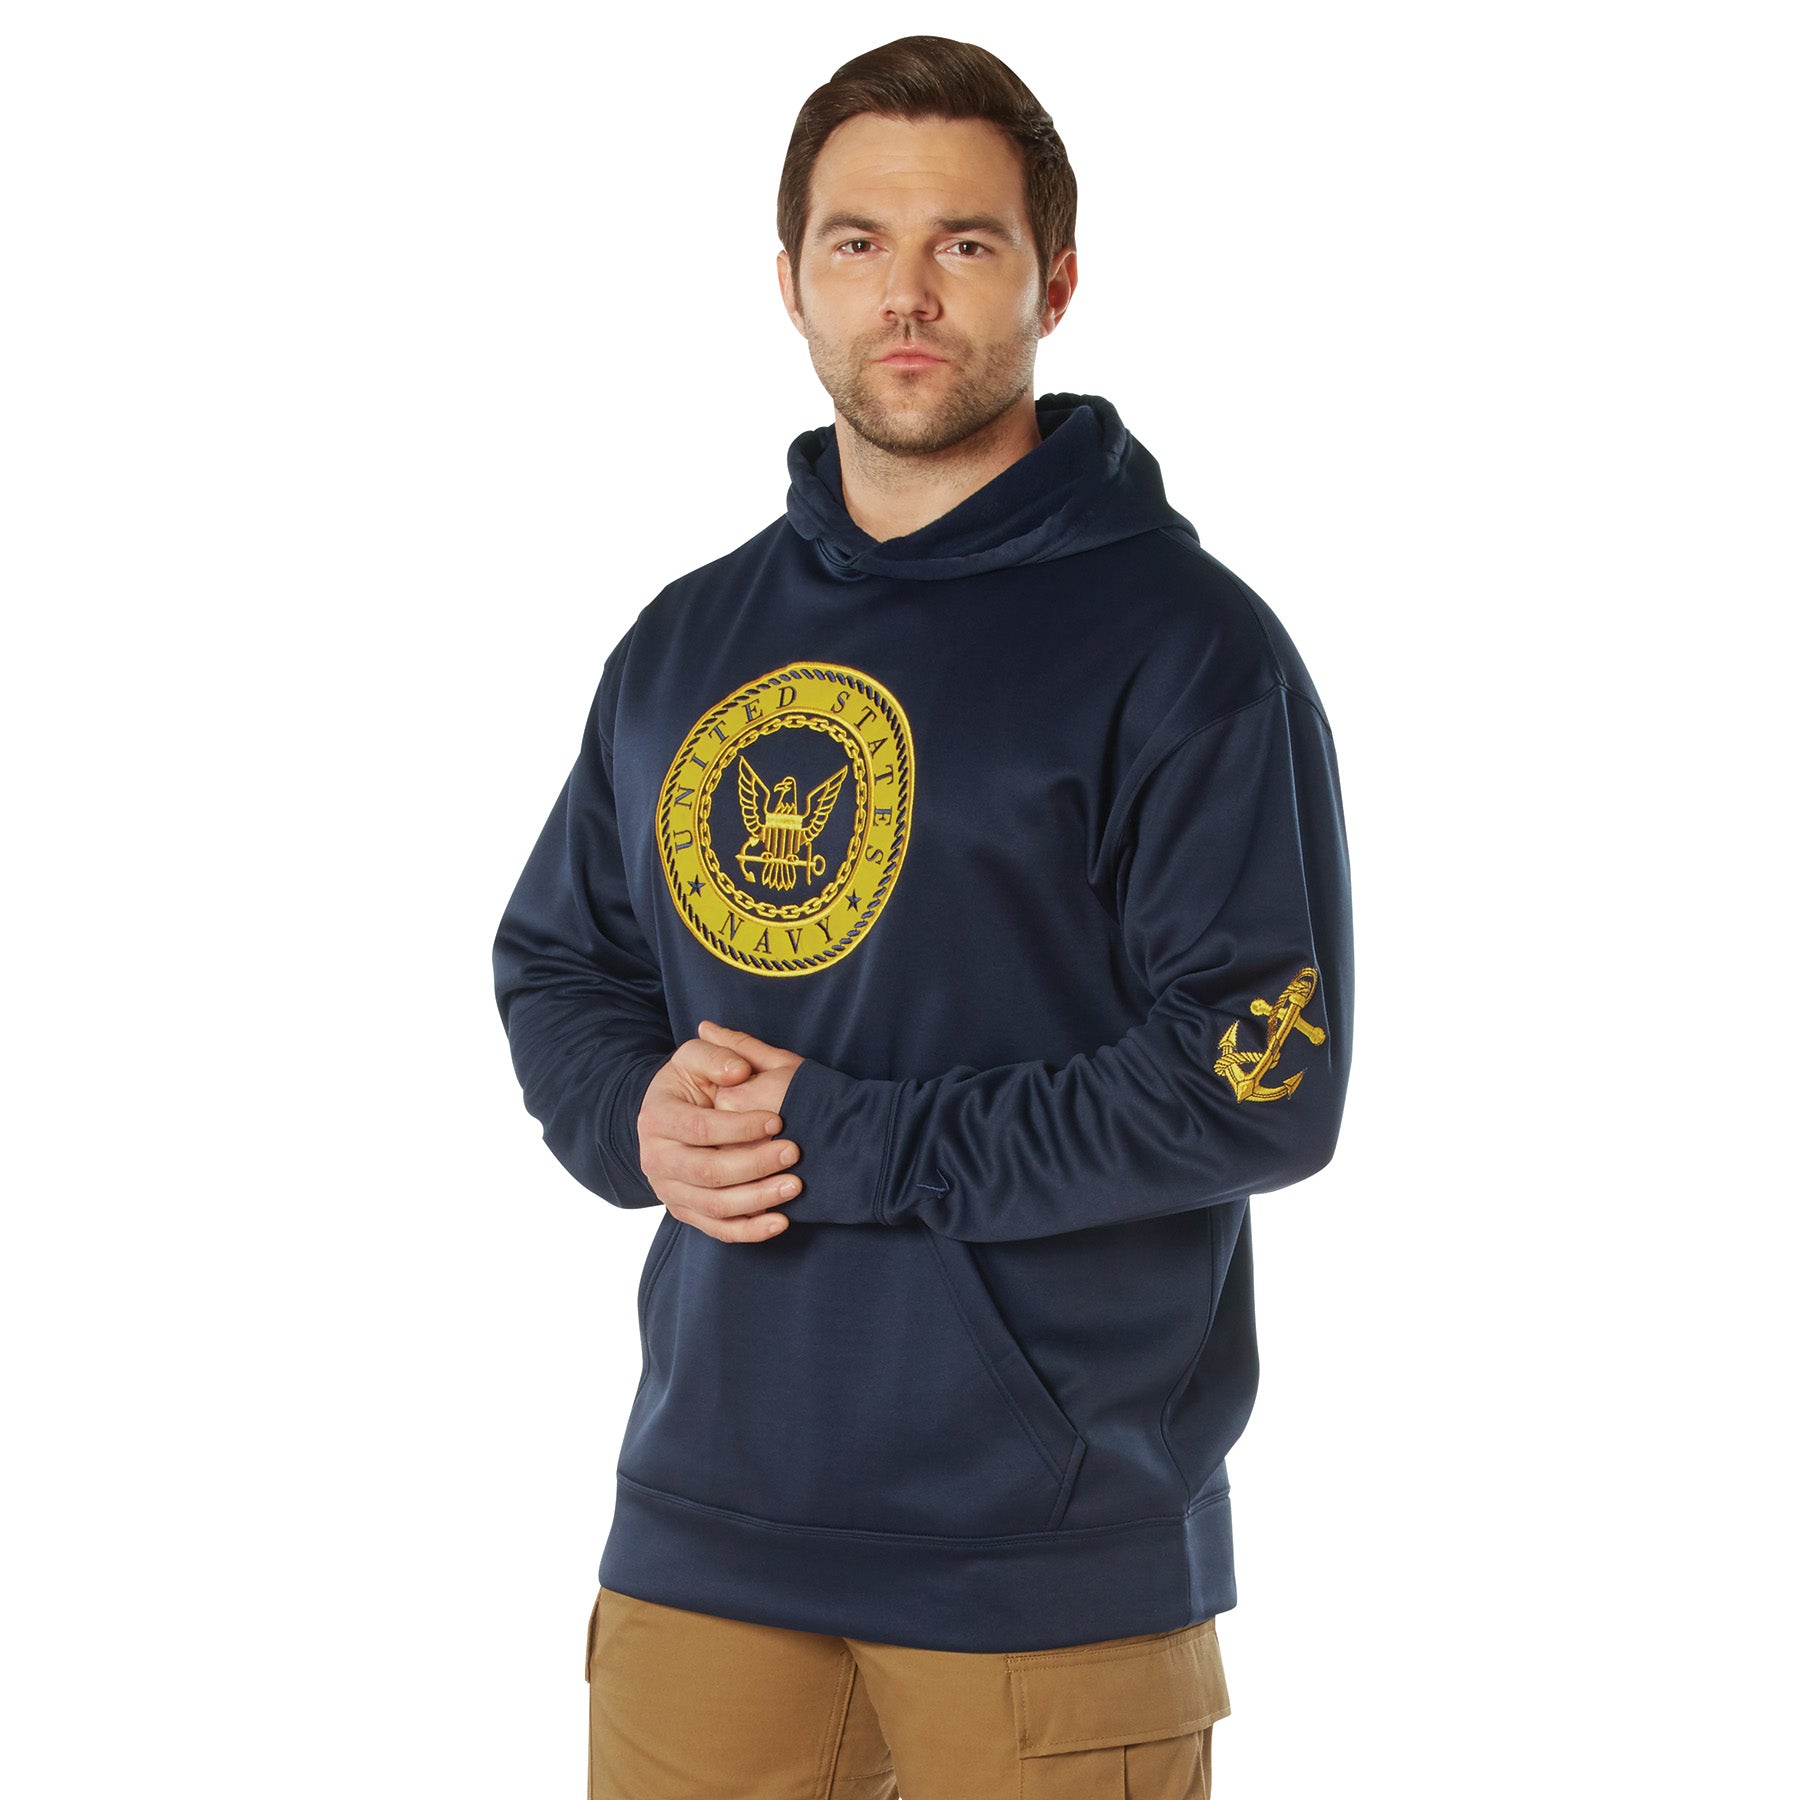 Poly Military Navy Emblem Embroidered Hooded Sweatshirts